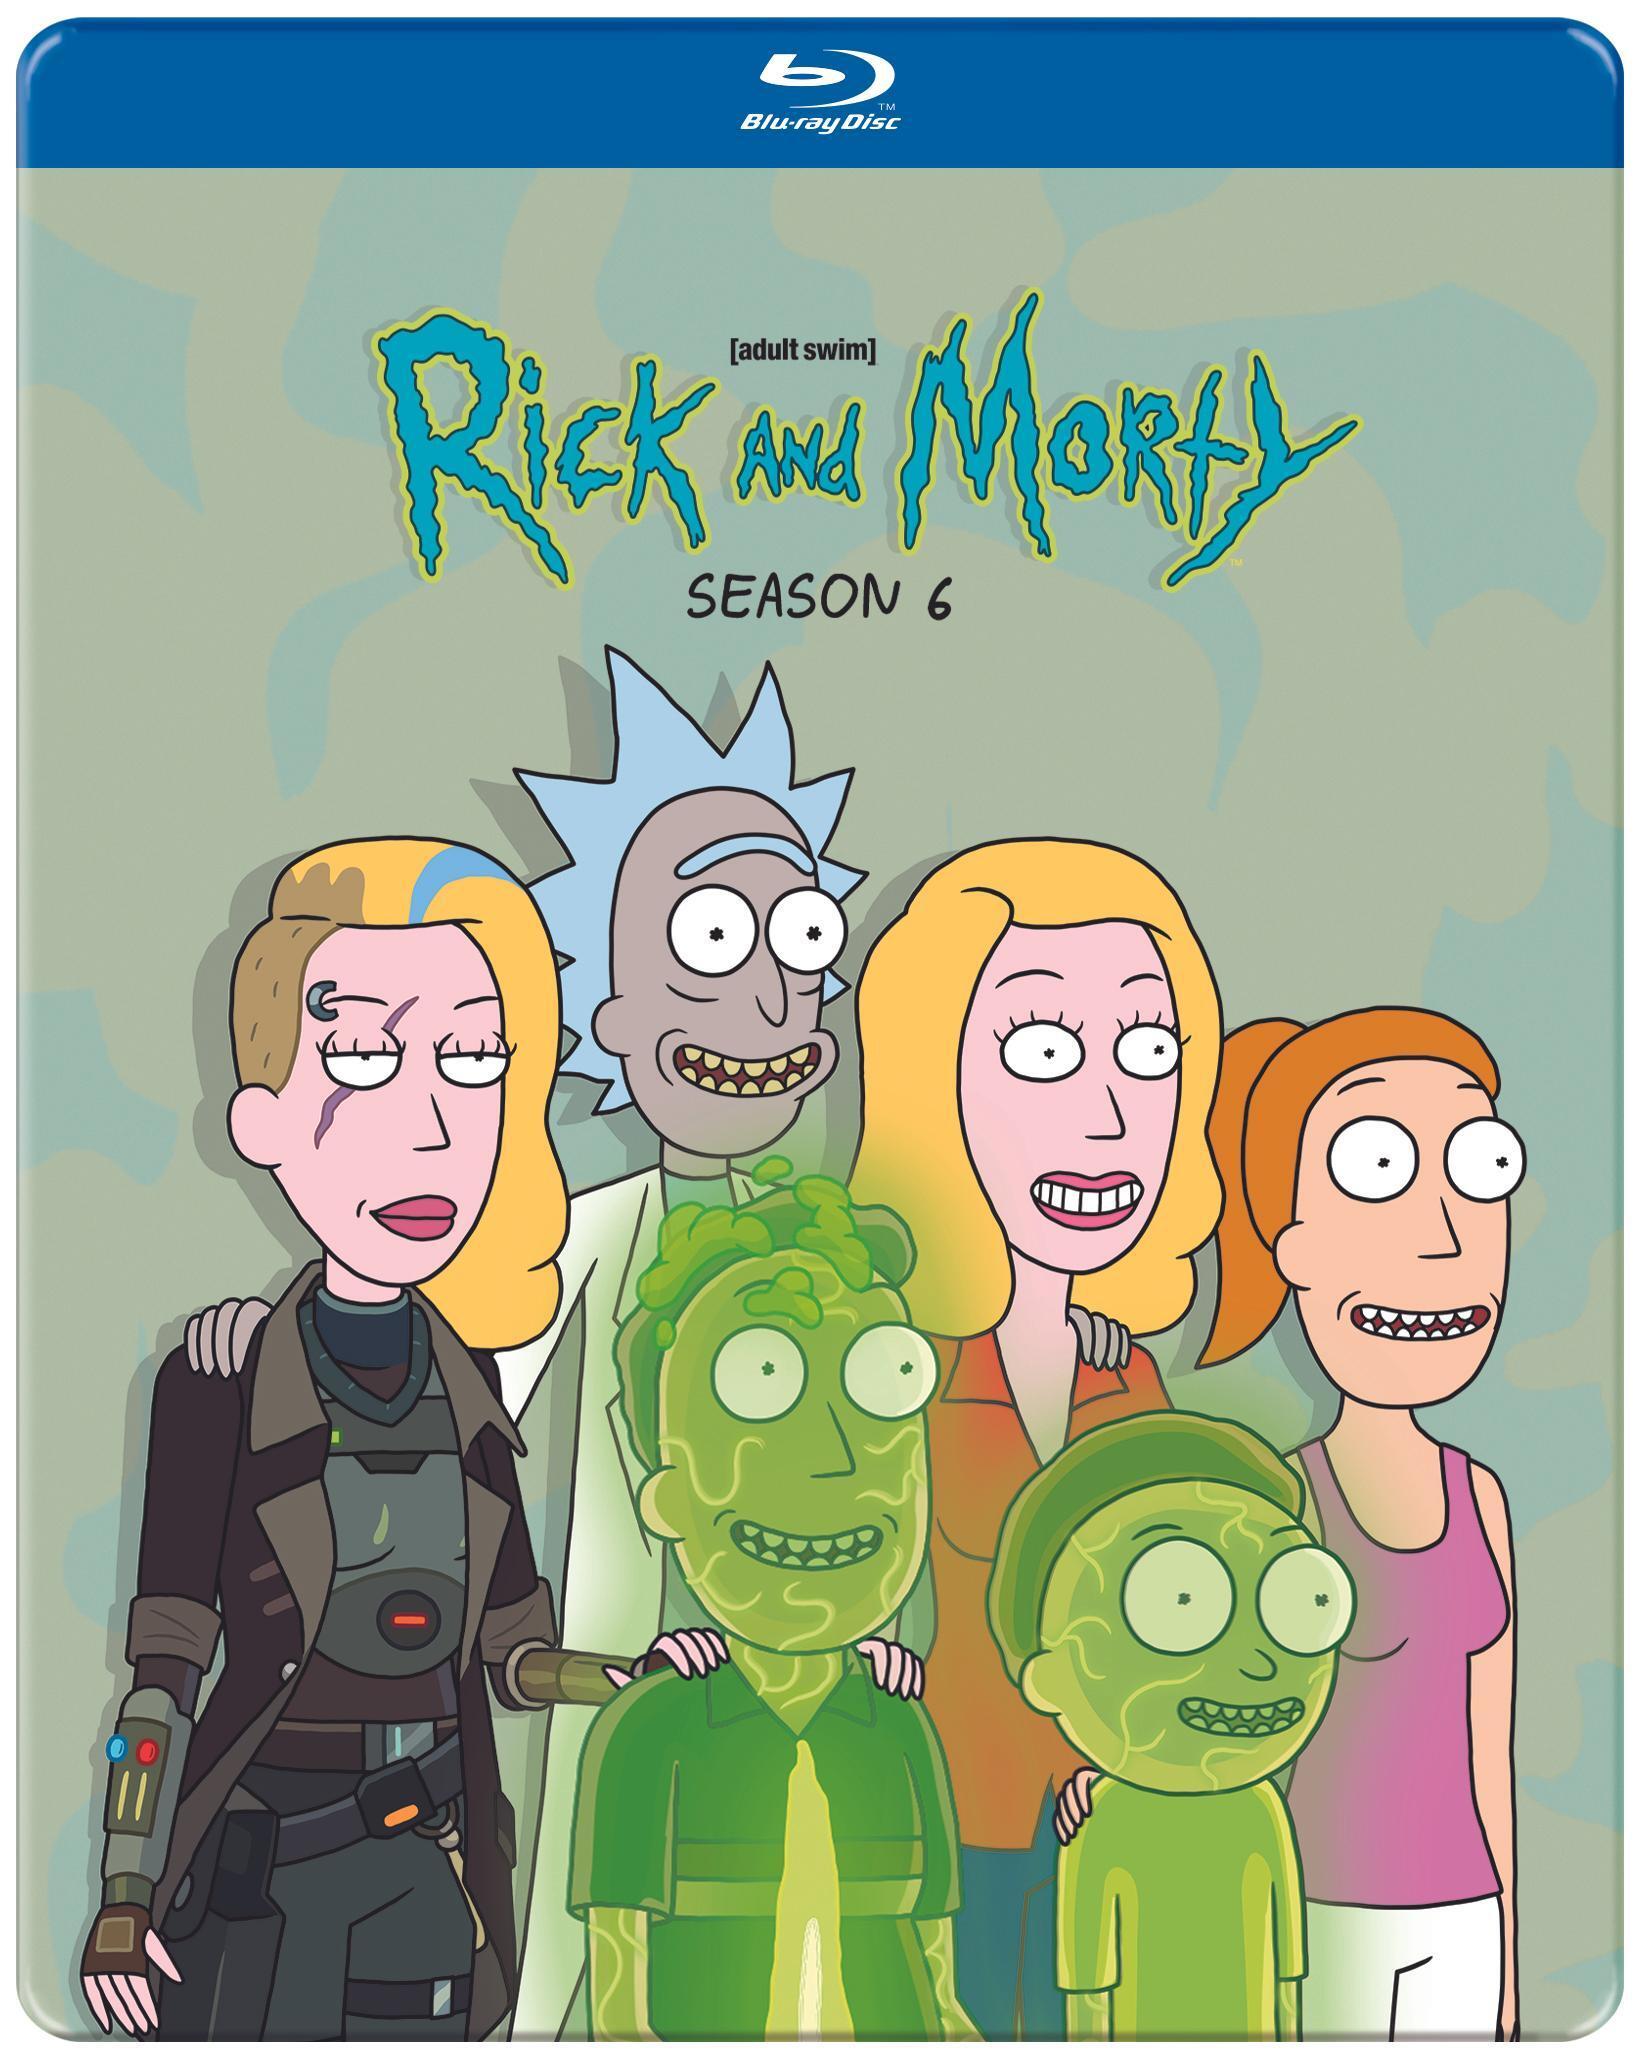 Rick And Morty: Season 6 (Steel Book) - Blu-ray [ 2022 ]  - Comedy Television On Blu-ray - TV Shows On GRUV